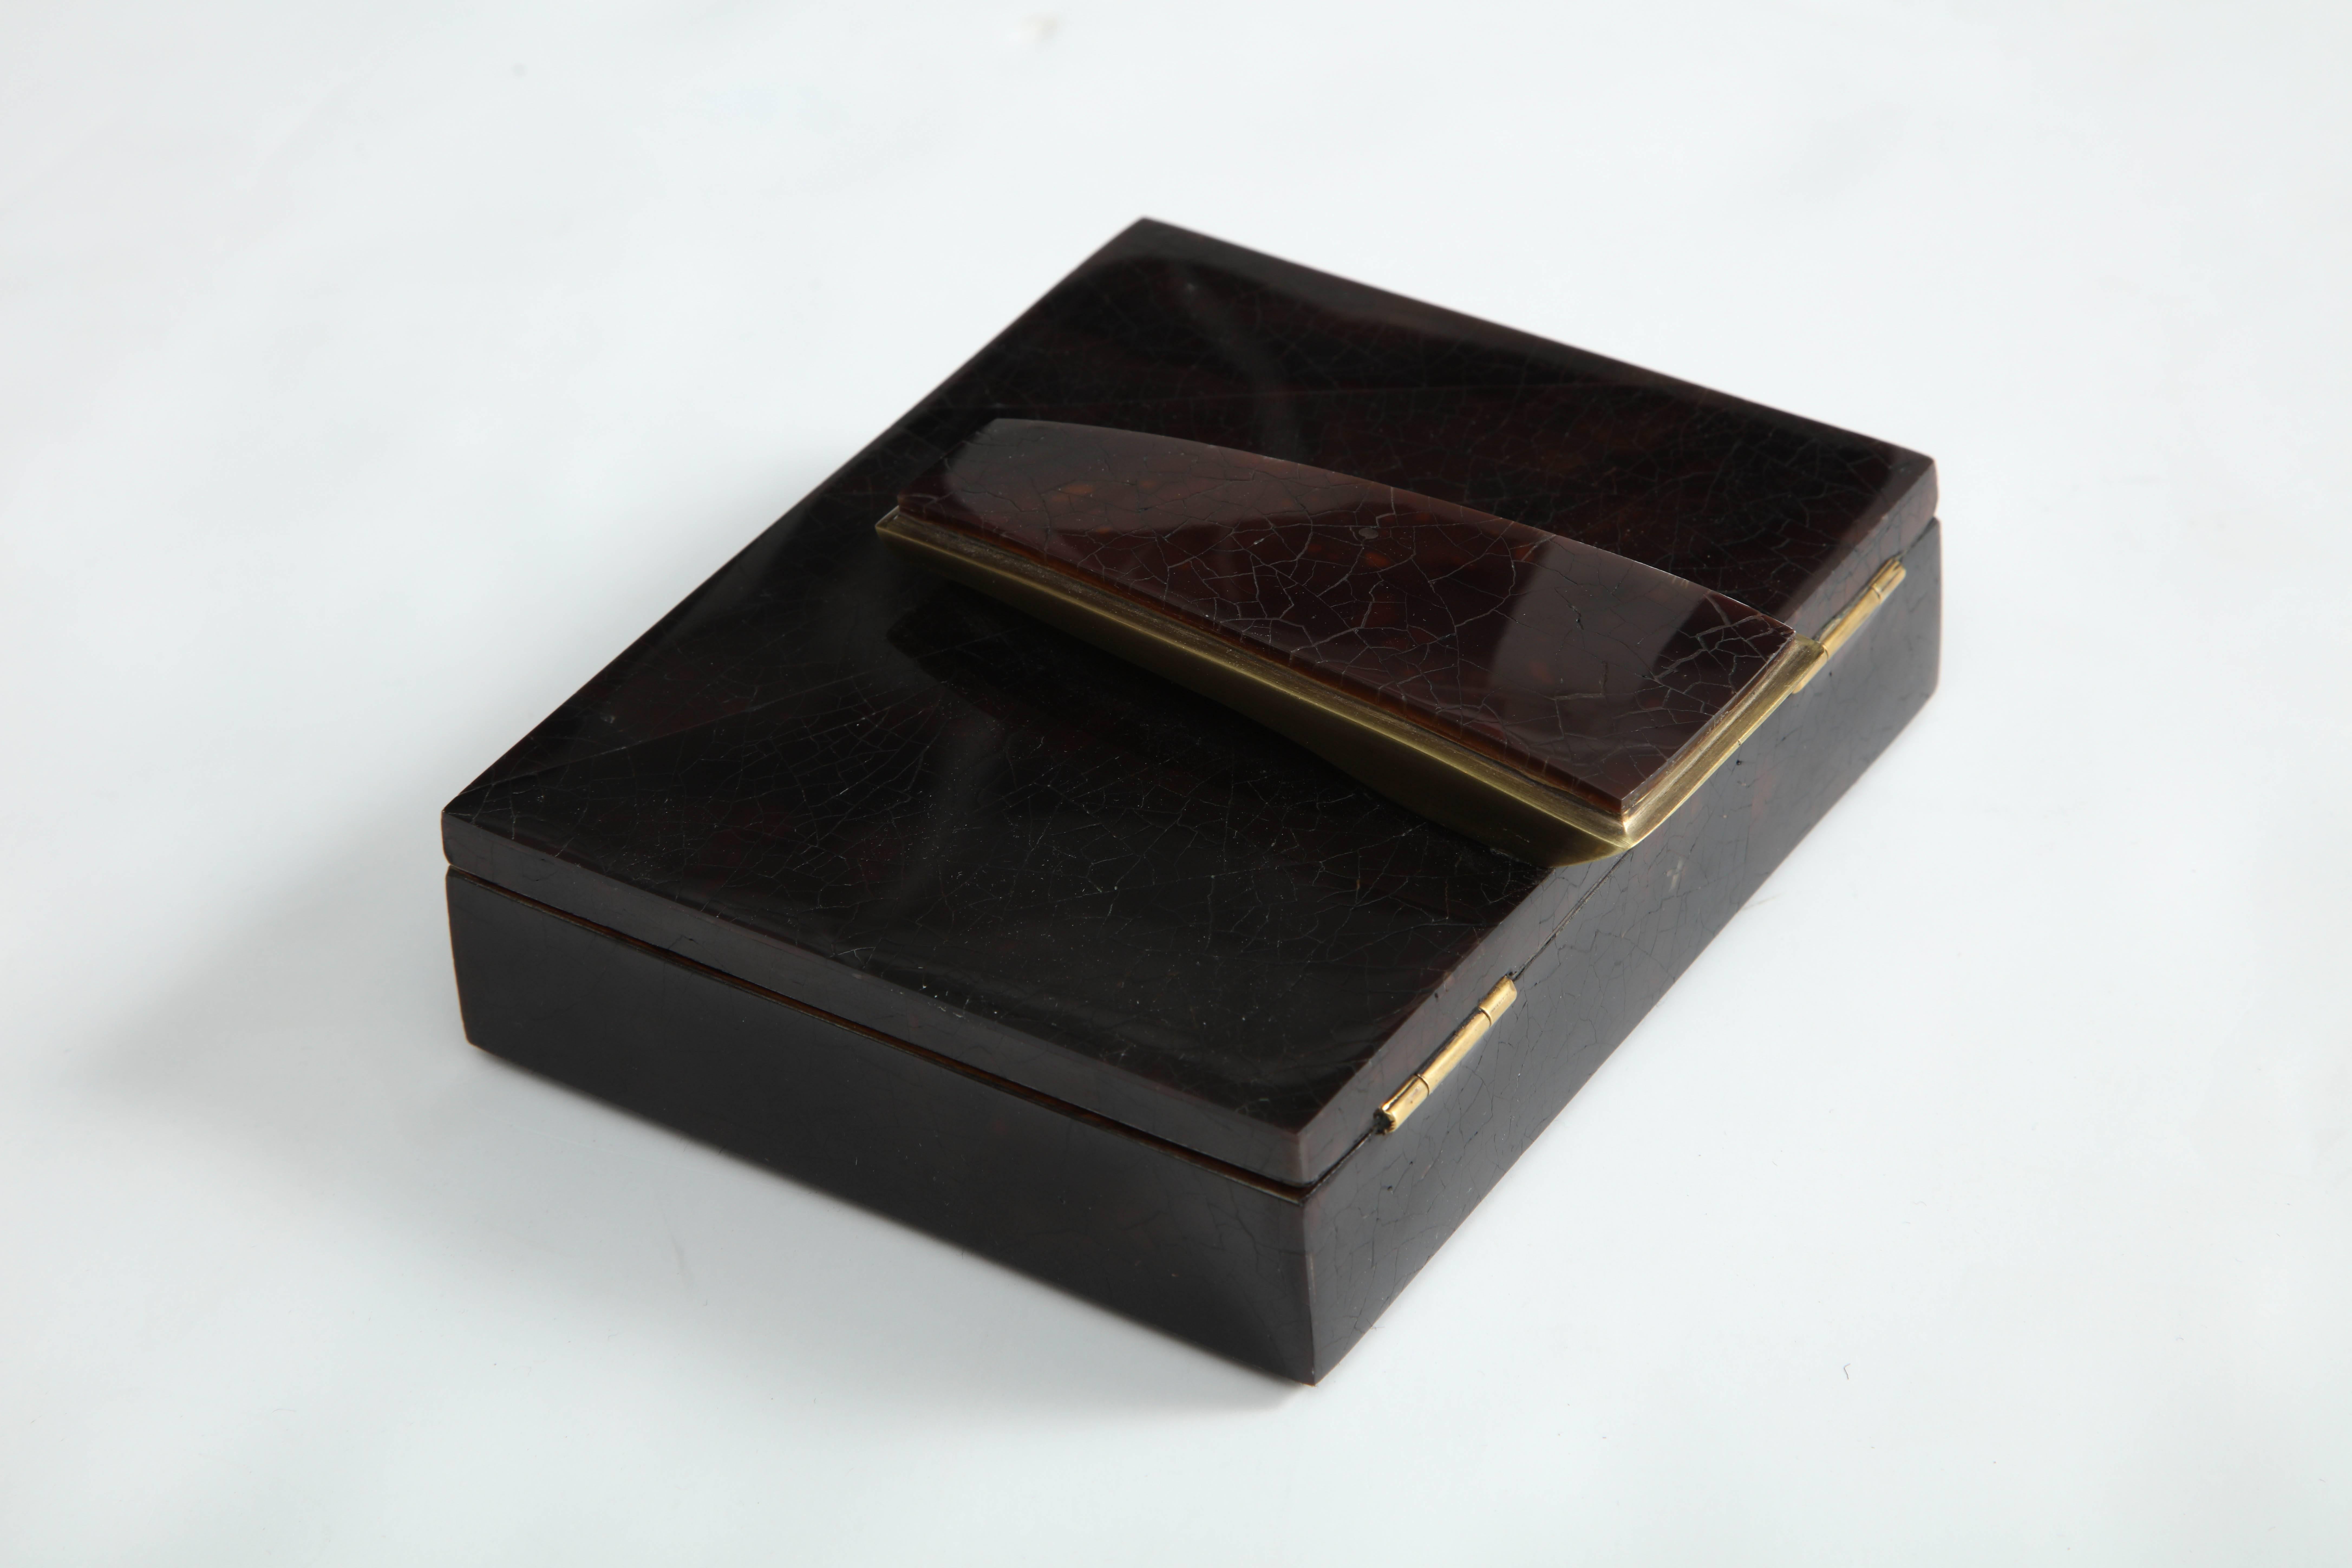 Hand-Crafted Box, Sea Shell with Bronze Details, Chocolate Color